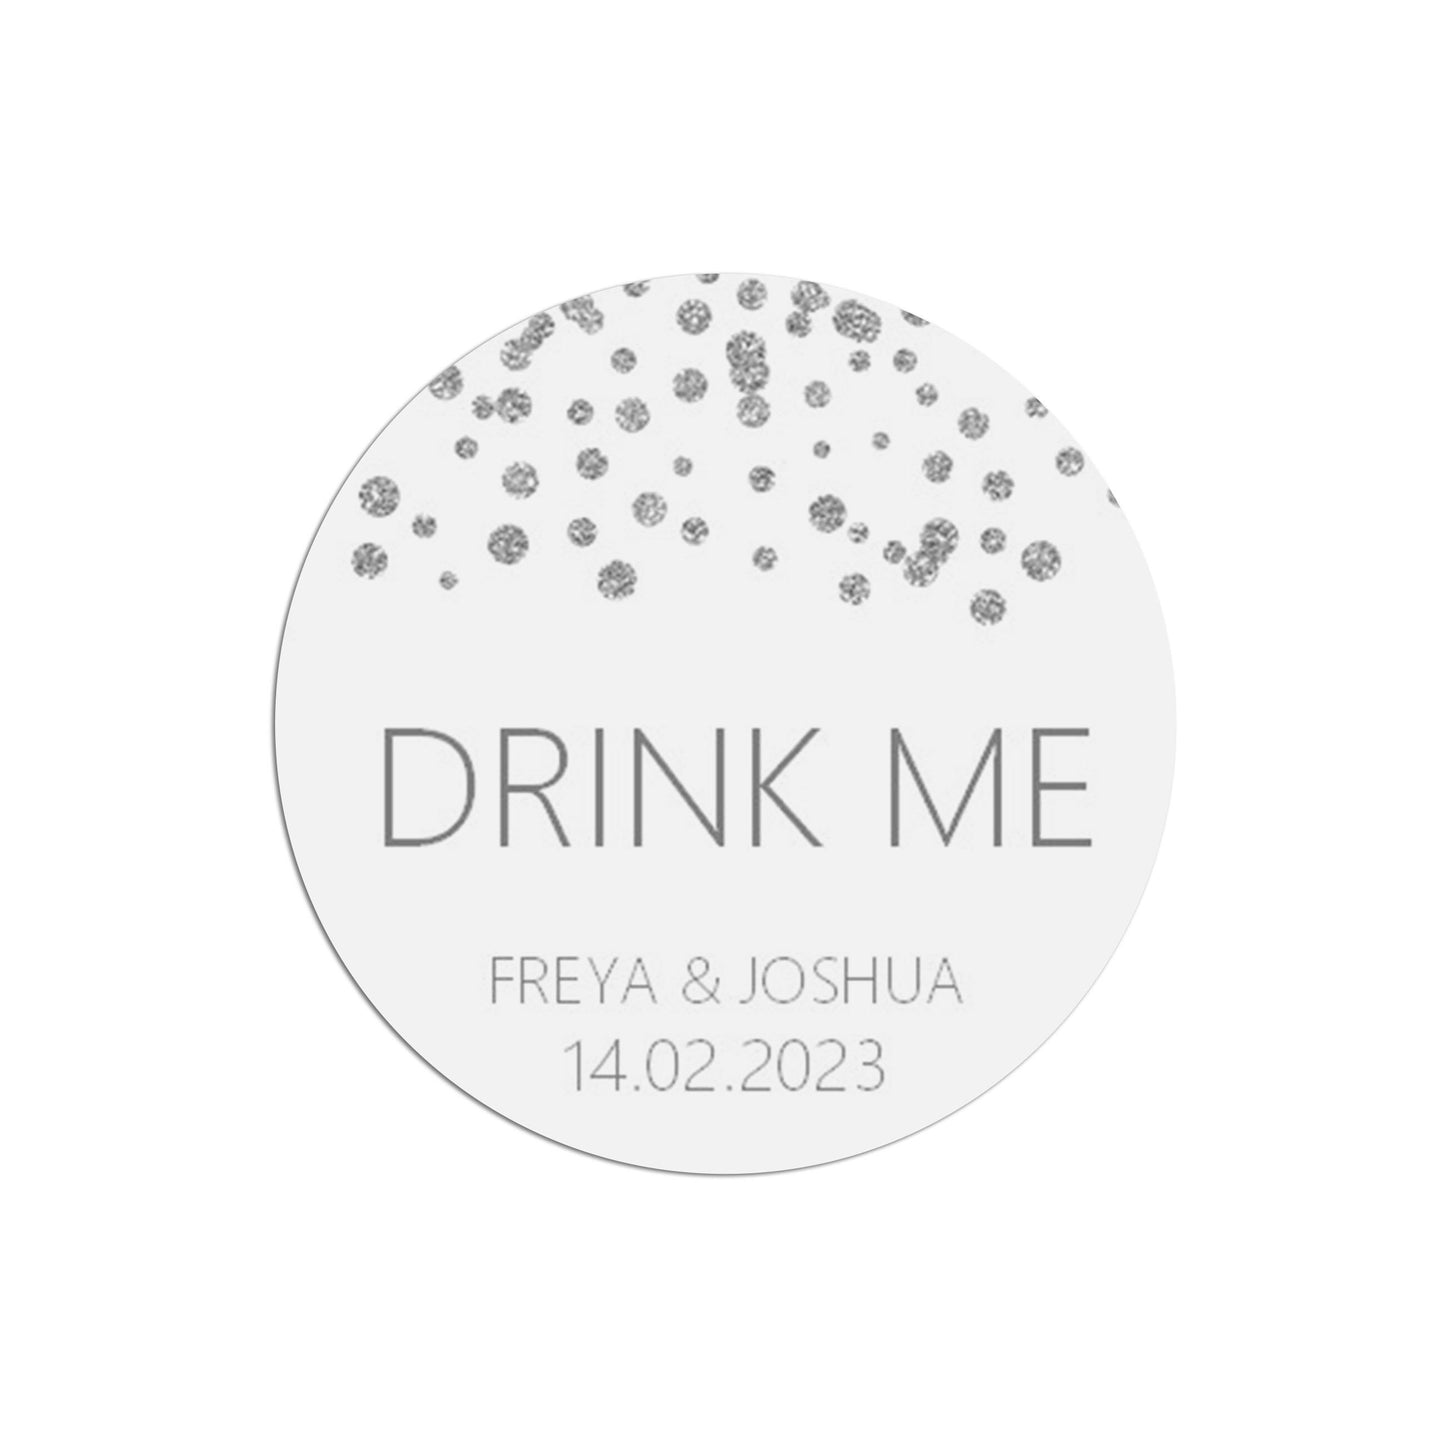 Drink Me Wedding Stickers, Silver Effect 37mm Round x 35 Stickers Per Sheet, Personalised At Bottom